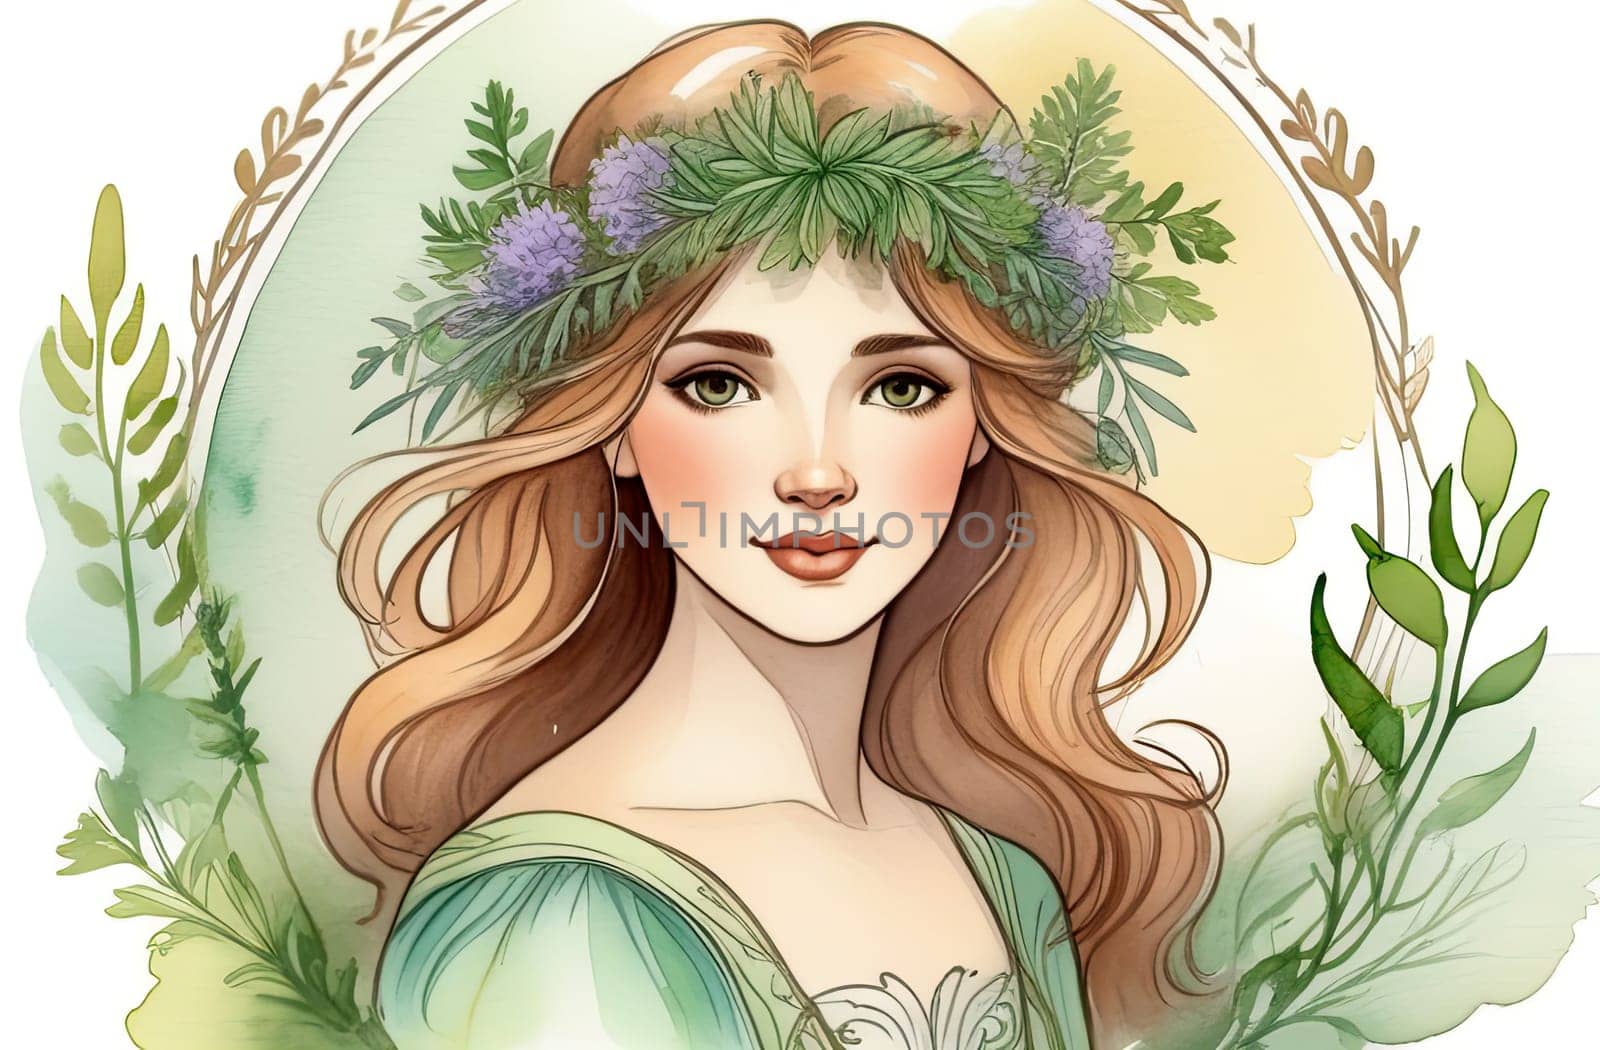 Portrait of a fantasy girl in pastel watercolor colors. Summer, spring fairy-tale portrait. Long curly hair